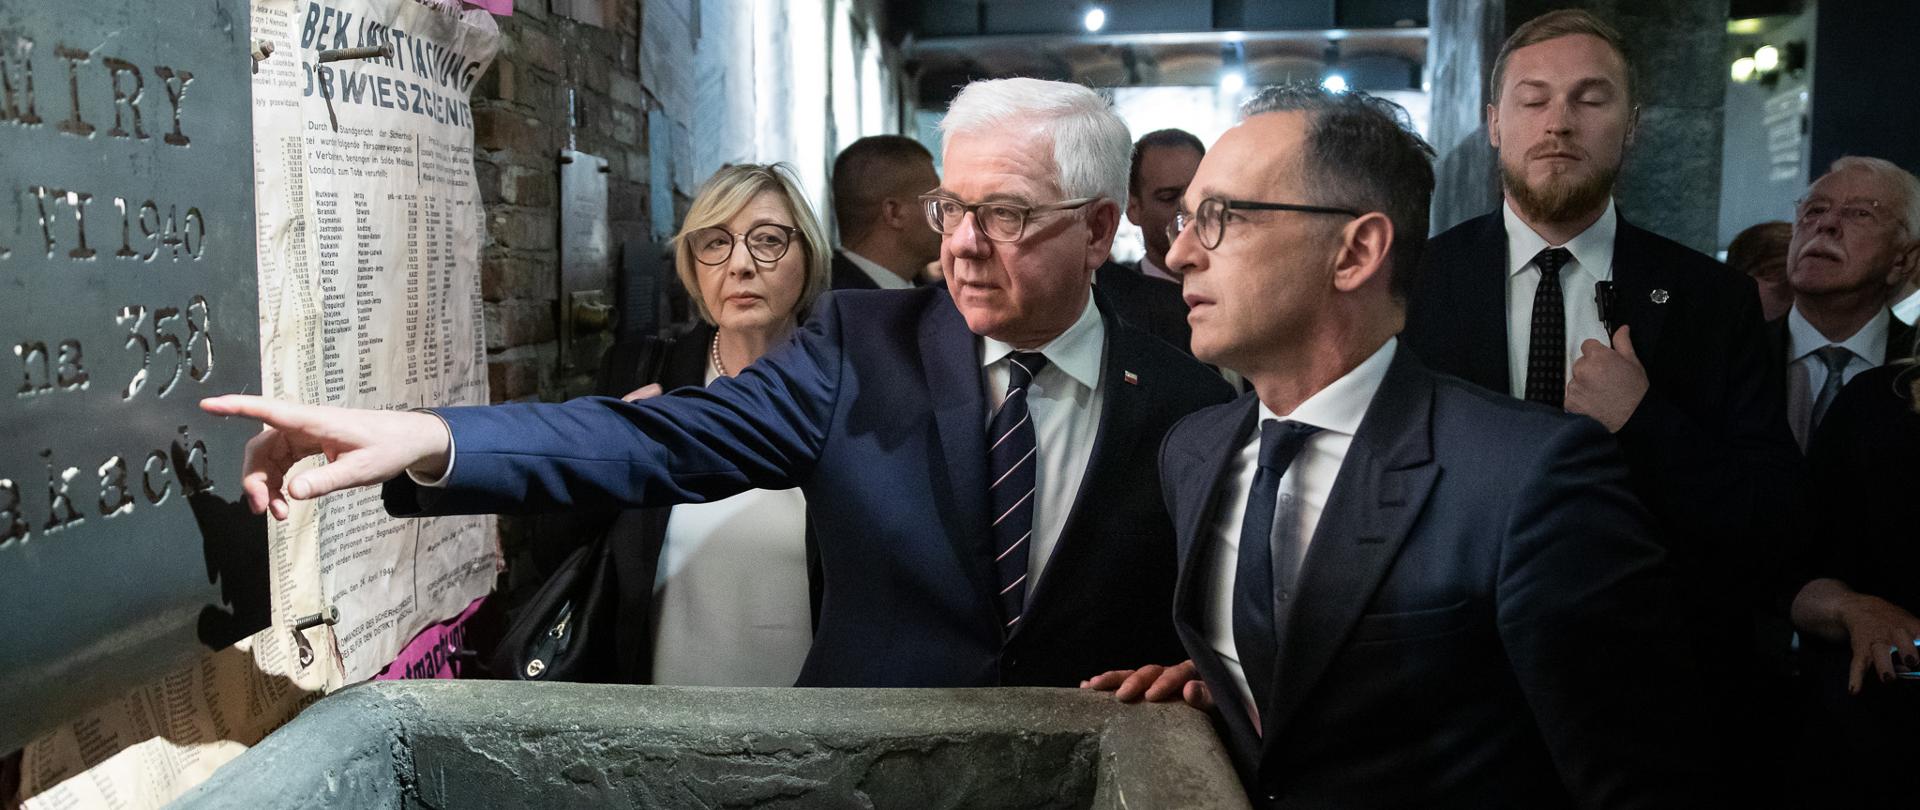 Foreign ministers of Poland and Germany mark 75th anniversary of Warsaw Uprising